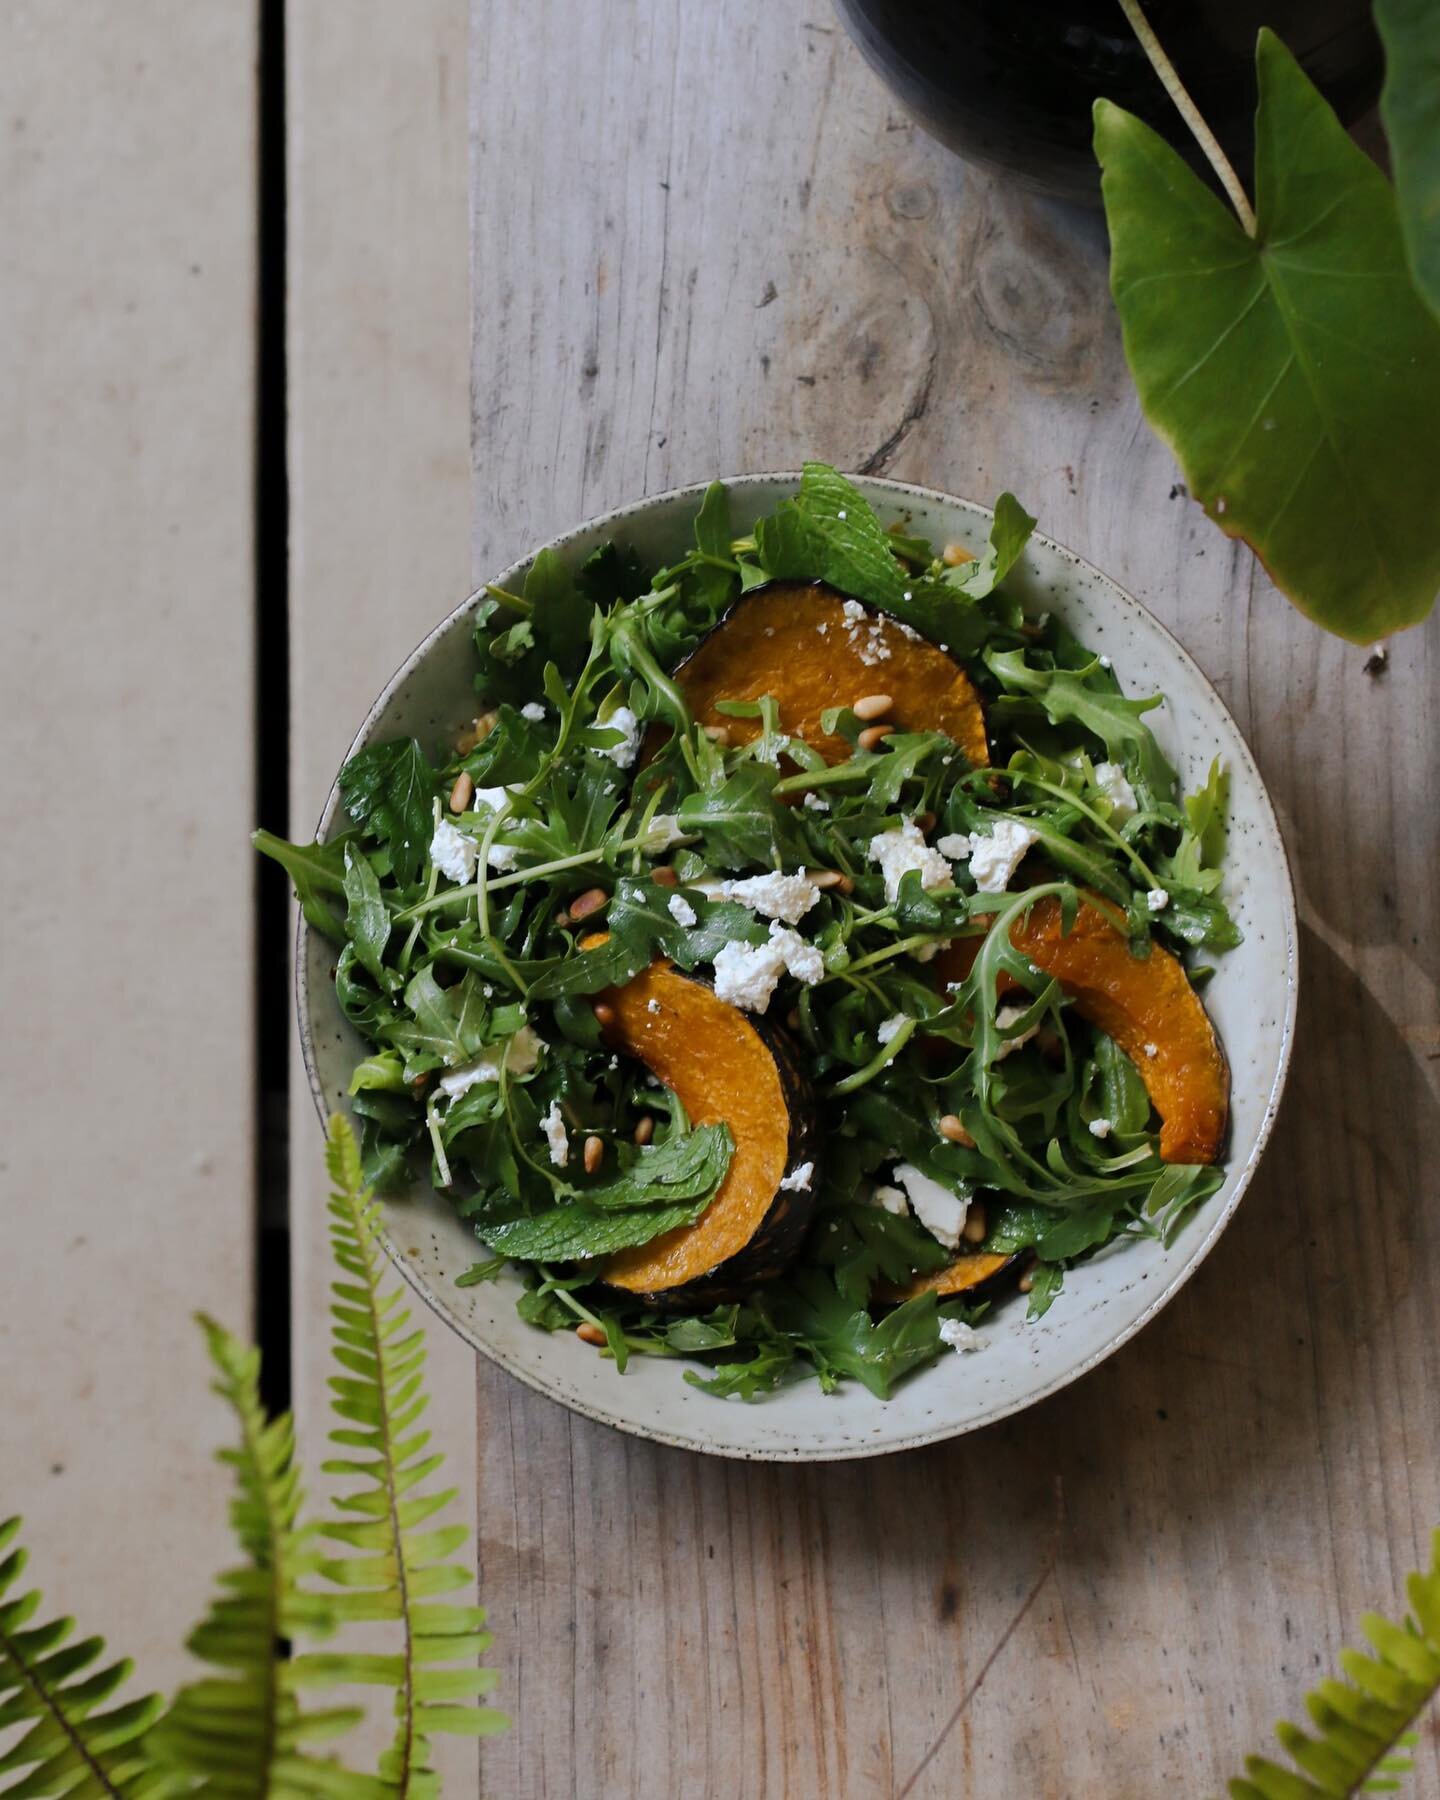 We&rsquo;re sharing this amazing Roasted Pumpkin Salad recipes from @nickykruse in our newest issue of estCA magazine and also on the site! Head over to check it out [link in bio] 🥗🎃 
&bull;
&bull;
&bull;
&bull;
&bull;
#delicious #foodlover #liveau